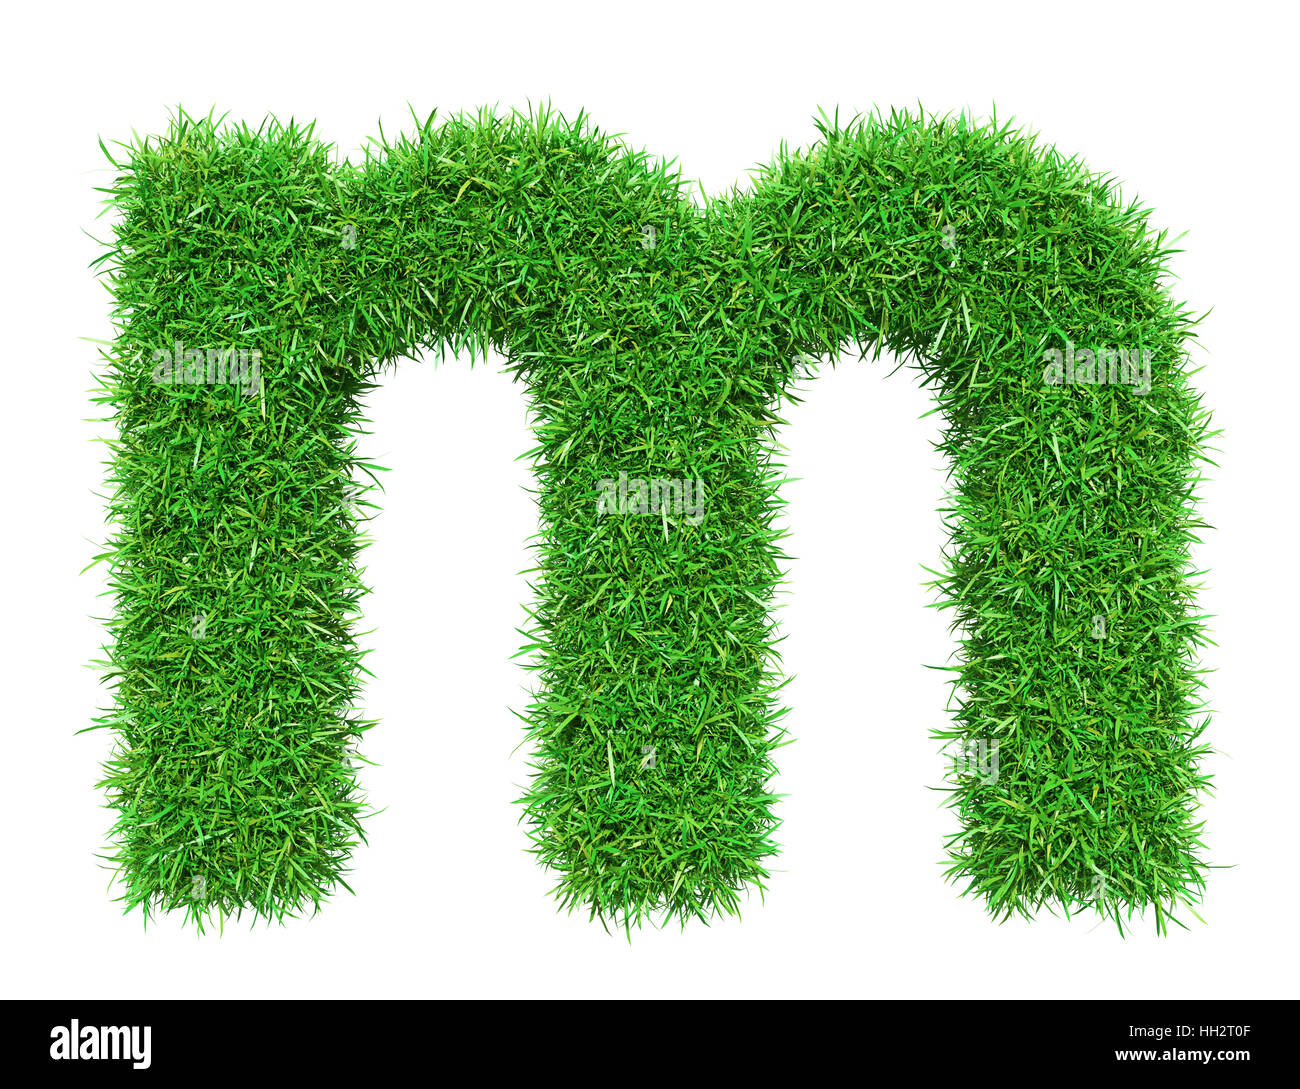 Green Grass Letter M Stock Photo - Alamy